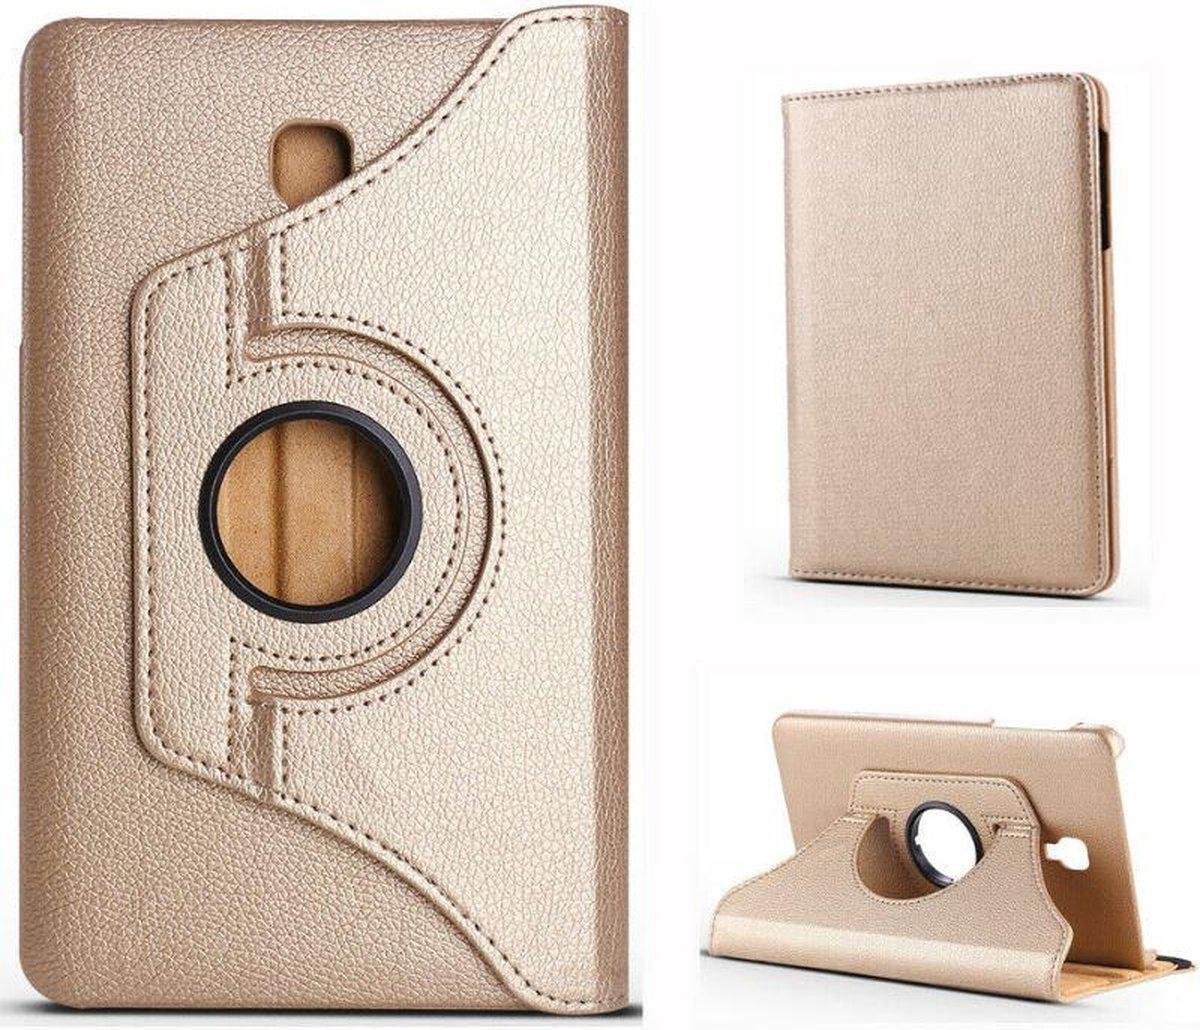 Samsung Tab A 8.0 (2017) Hoesje - Draaibare Tab A 8.0 Hoes Case Cover voor de Samsung Galaxy Tablet A 8.0 2017 - 8 inch - Goud